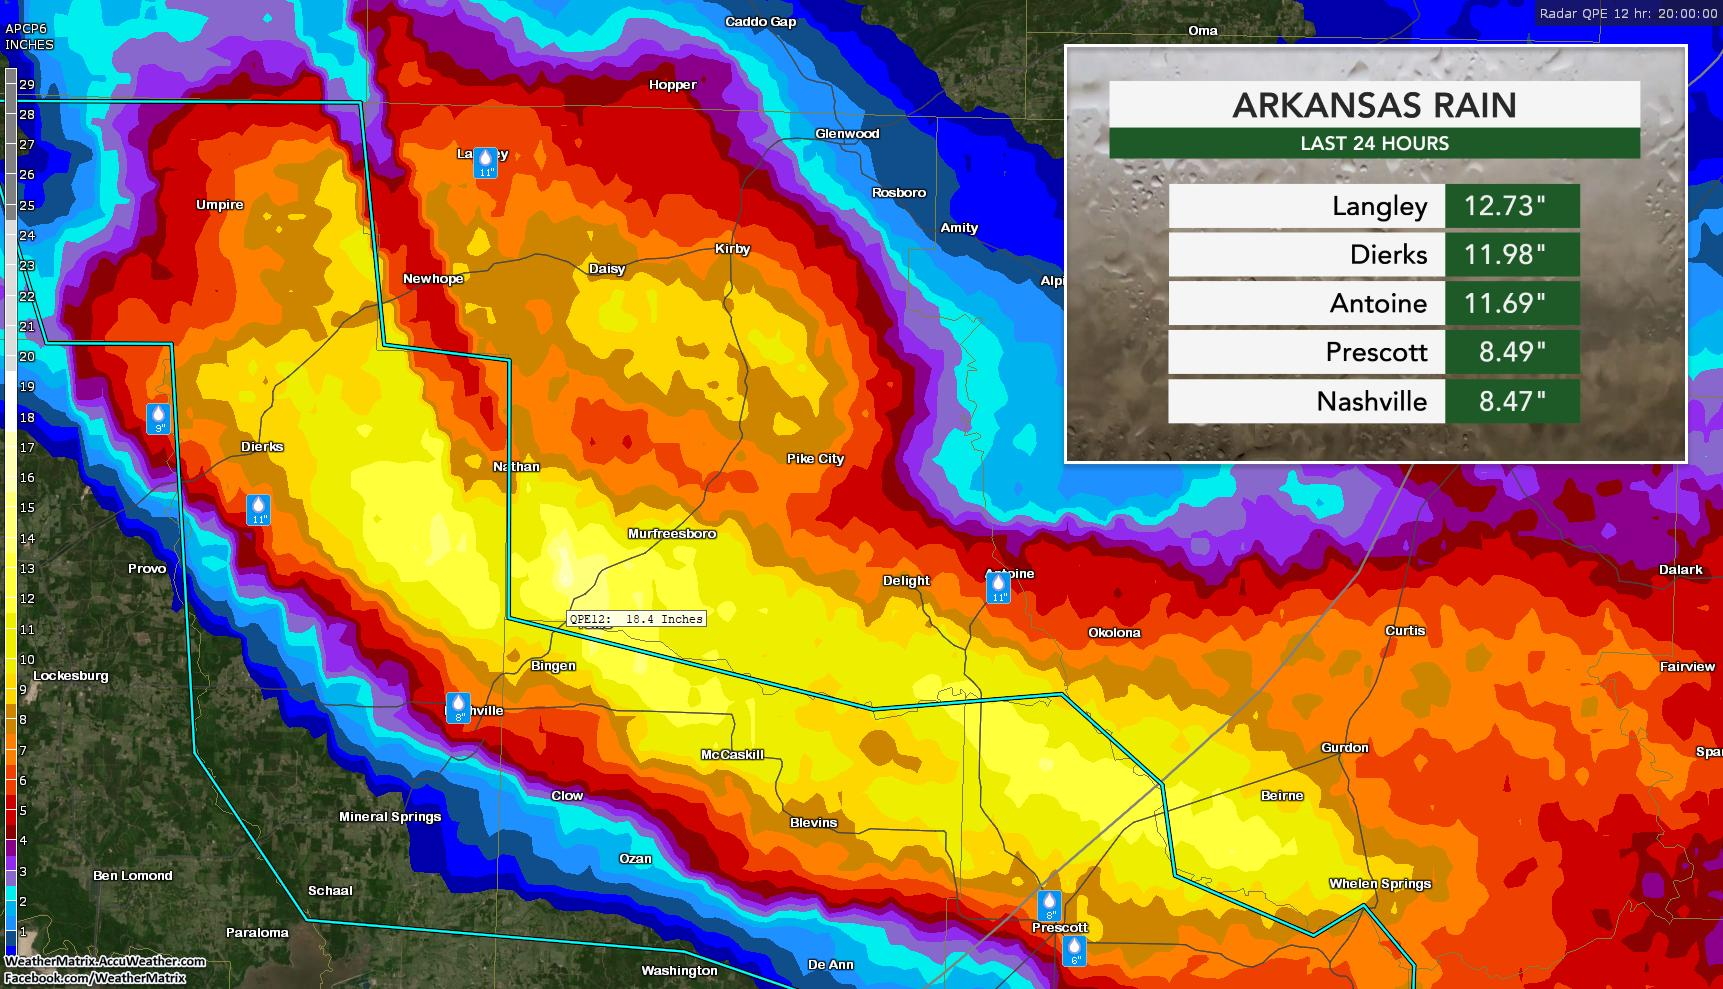 Radar estimates of rainfall in Arkansas from Tropical Depression Barry, 16 July 2019. Arkansas is now the fifth state to post a new tropical storm or hurricane rainfall record since 2017, joining Texas, Hawaii, North Carolina, and South Carolina. These exceptional rainstorms keep happening and appear to be part of a trend toward more extreme events connected to climate change. Graphic: WeatherMatrix